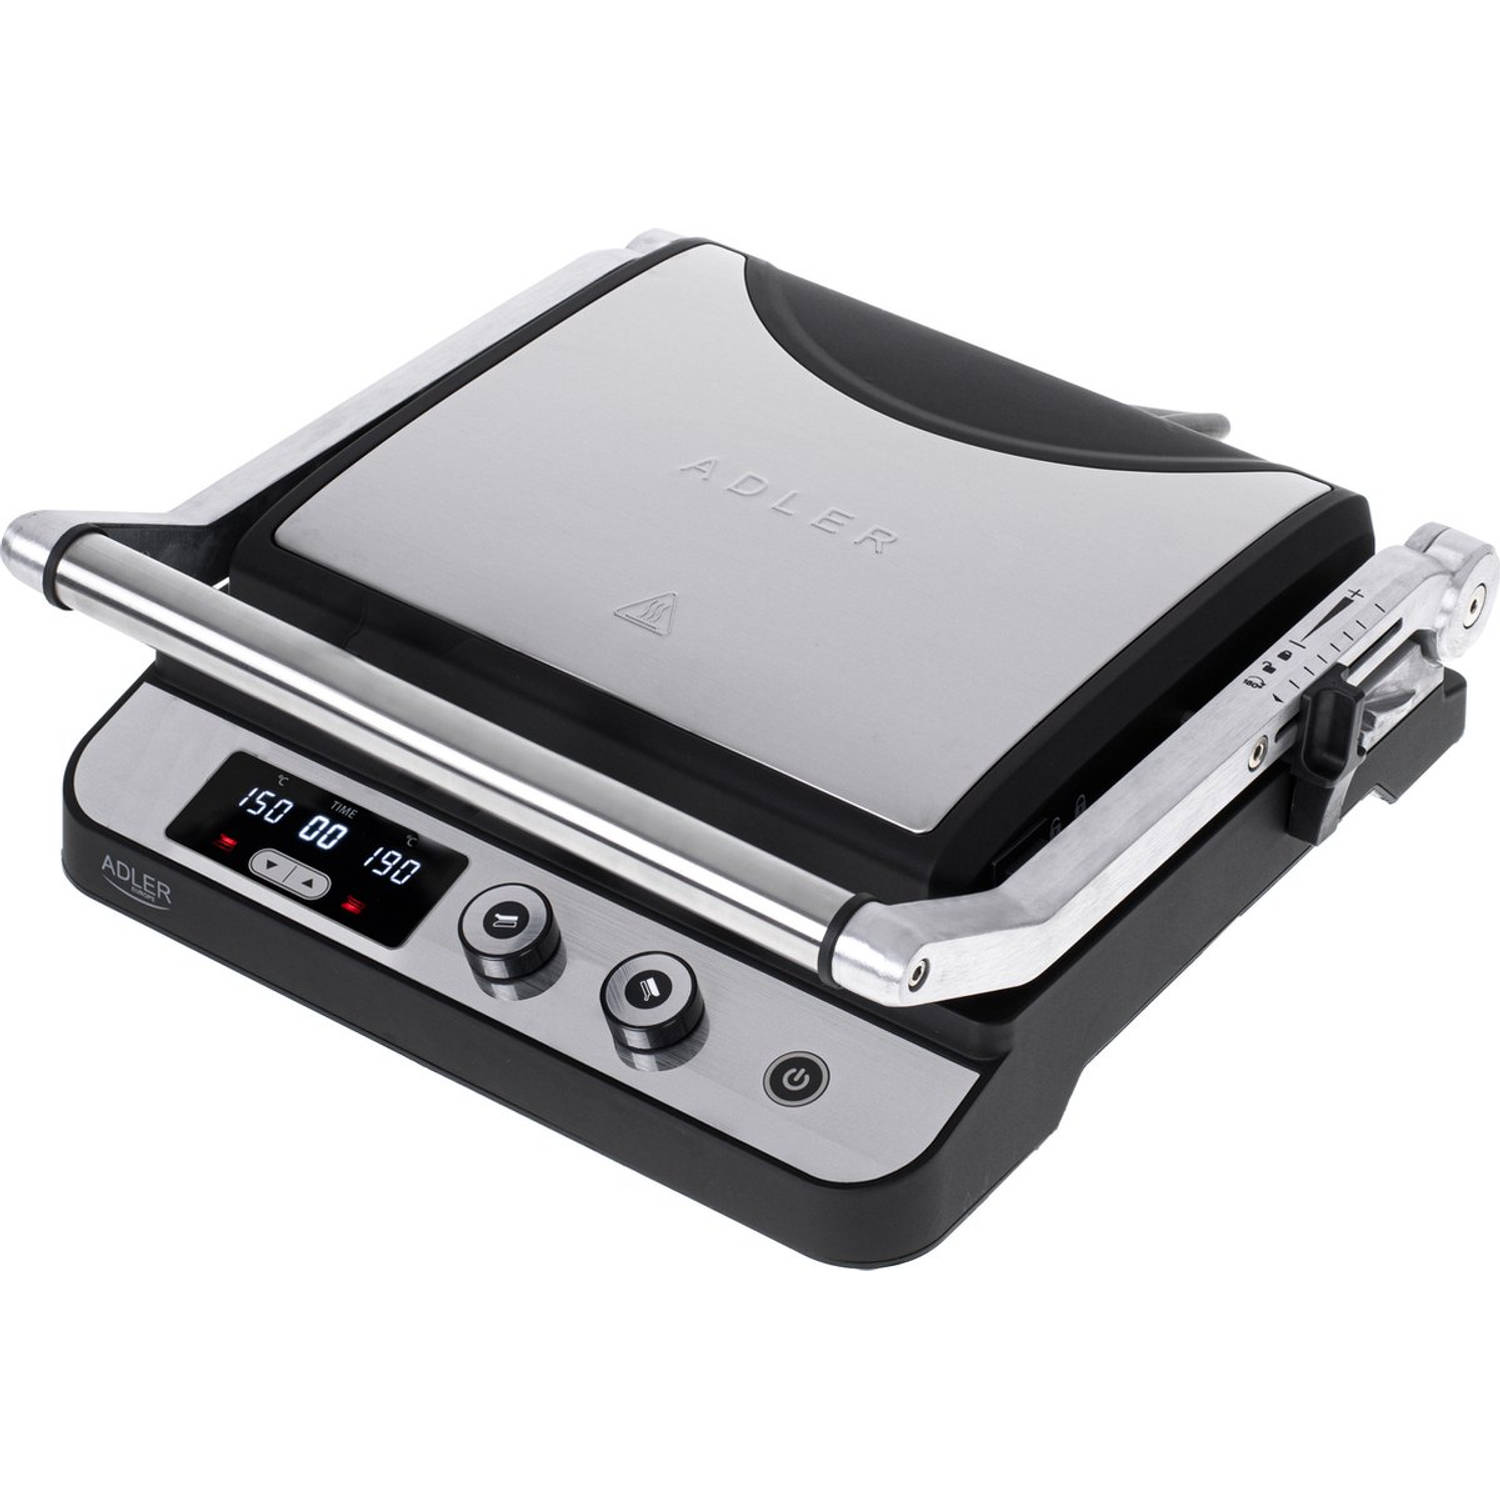 Adler AD 3059 Electric grill LED 2in1